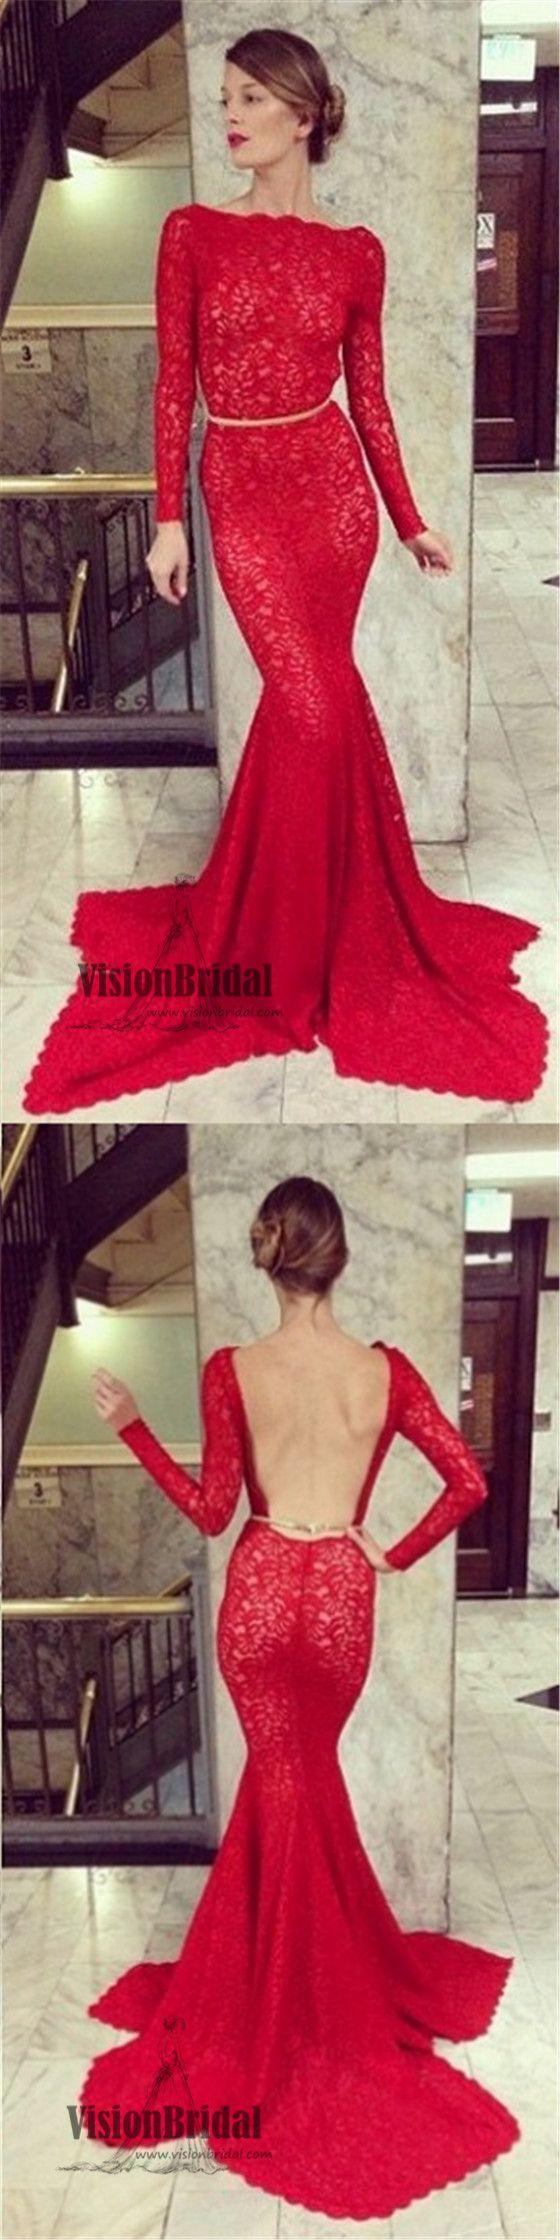 Wedding - Red Long Sleeves Lace Mermaid Prom Dress, Open Back Prom Dress With Golden Band, Prom Dress, VB0214